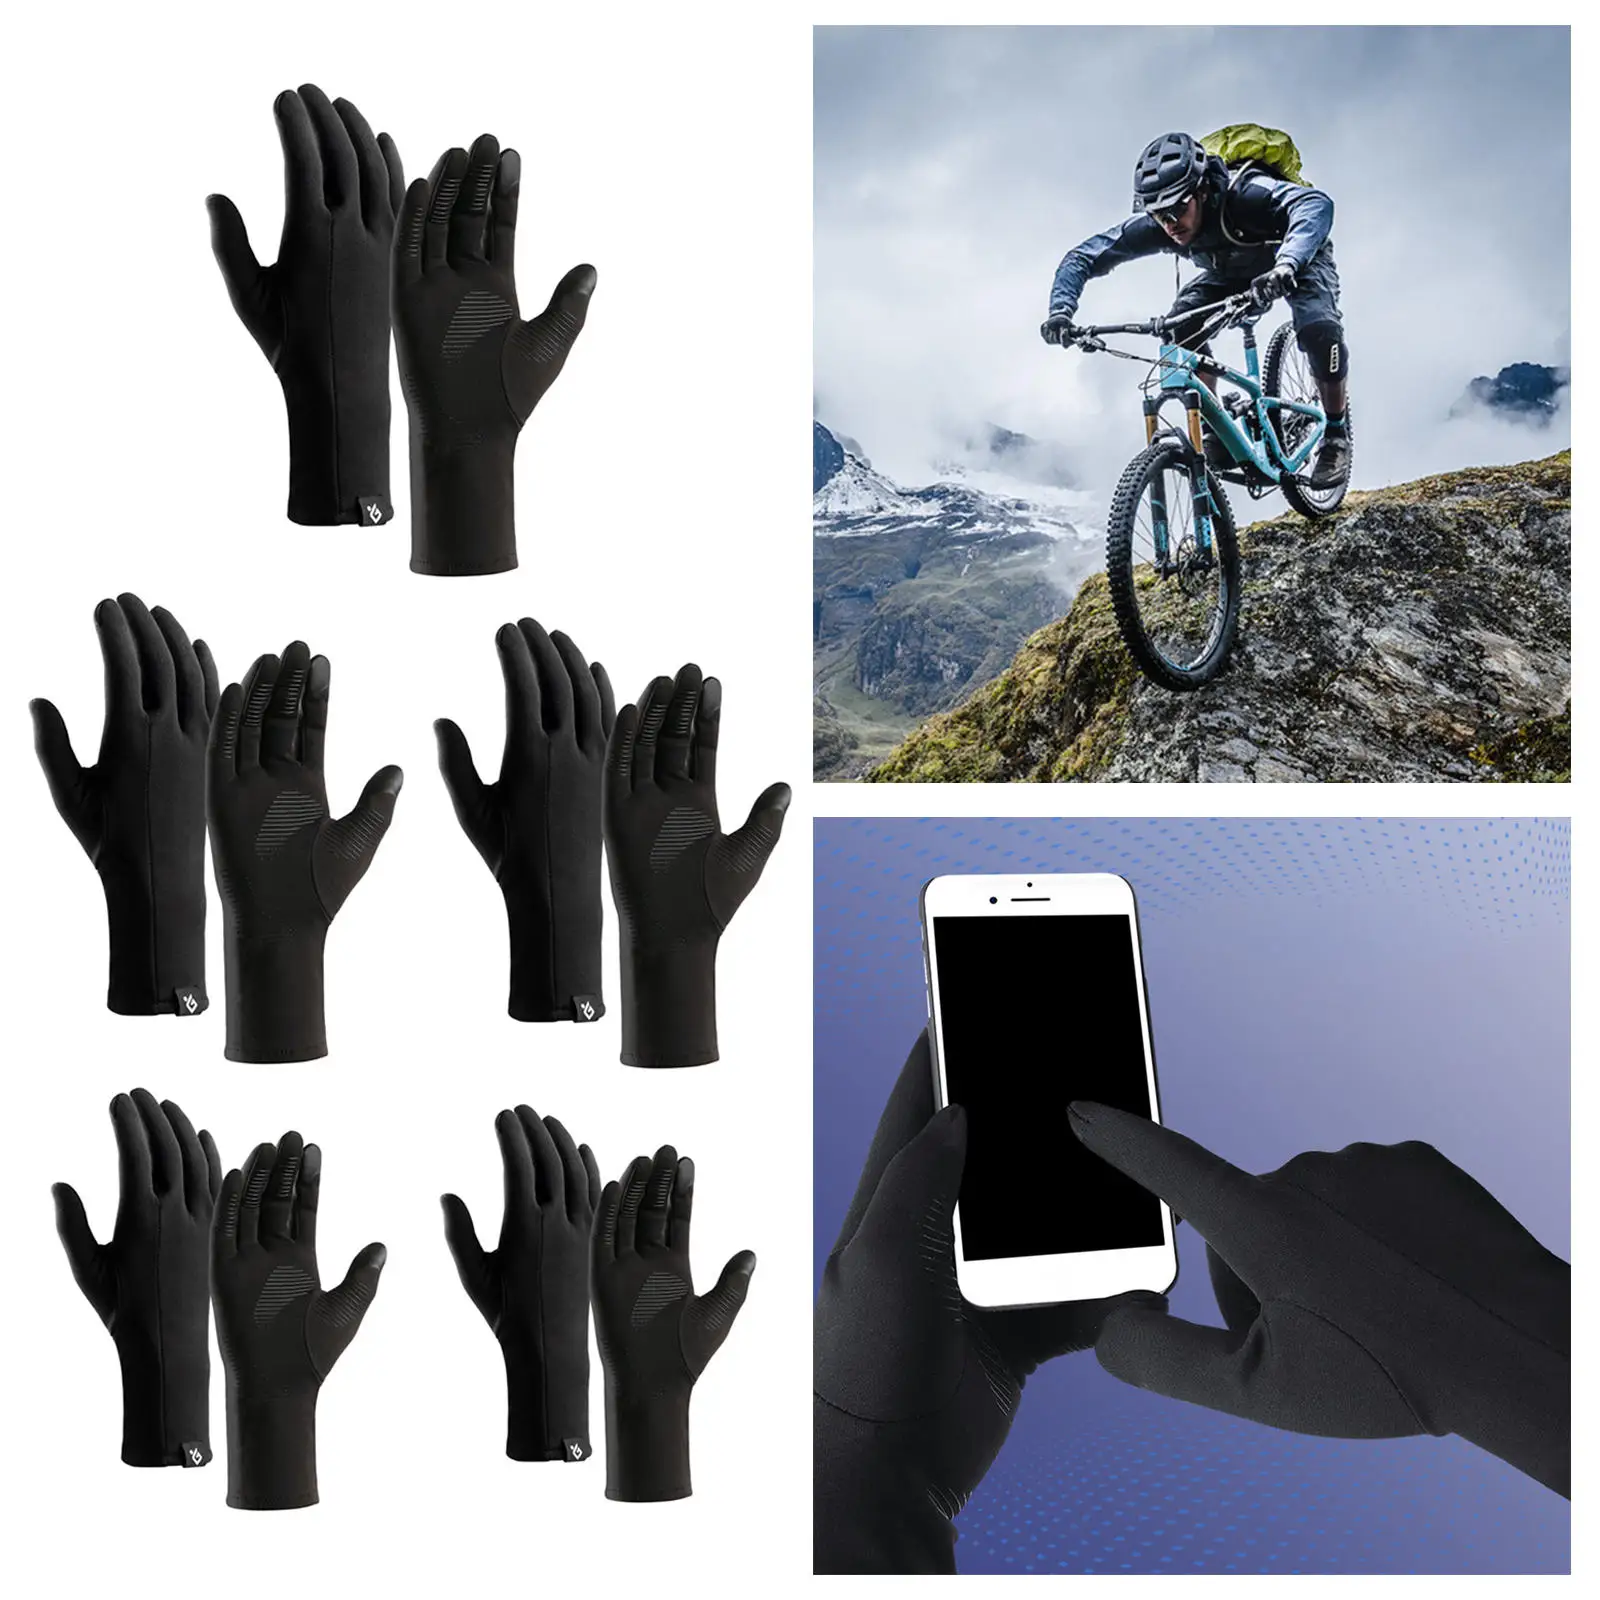 Windproof Men Gloves AntiSlip Touchscreen Warm Light Thermal Full Finger Driving Ski Winter Running Motorcycle Cycling Driving